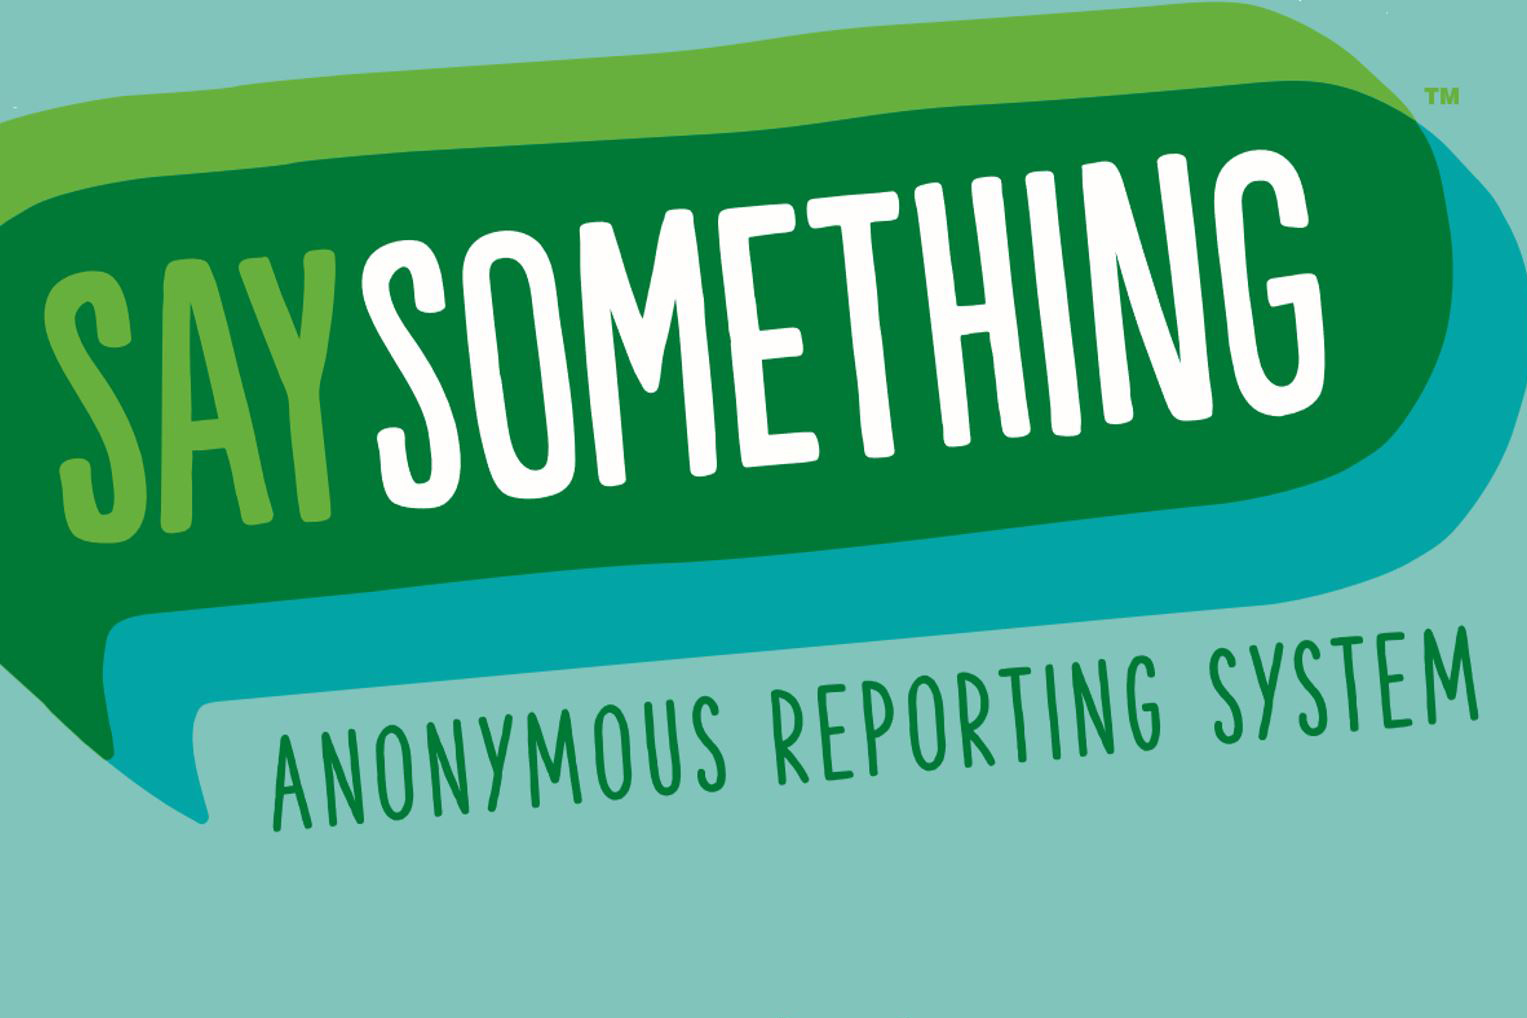 Green logo for say something reporting system